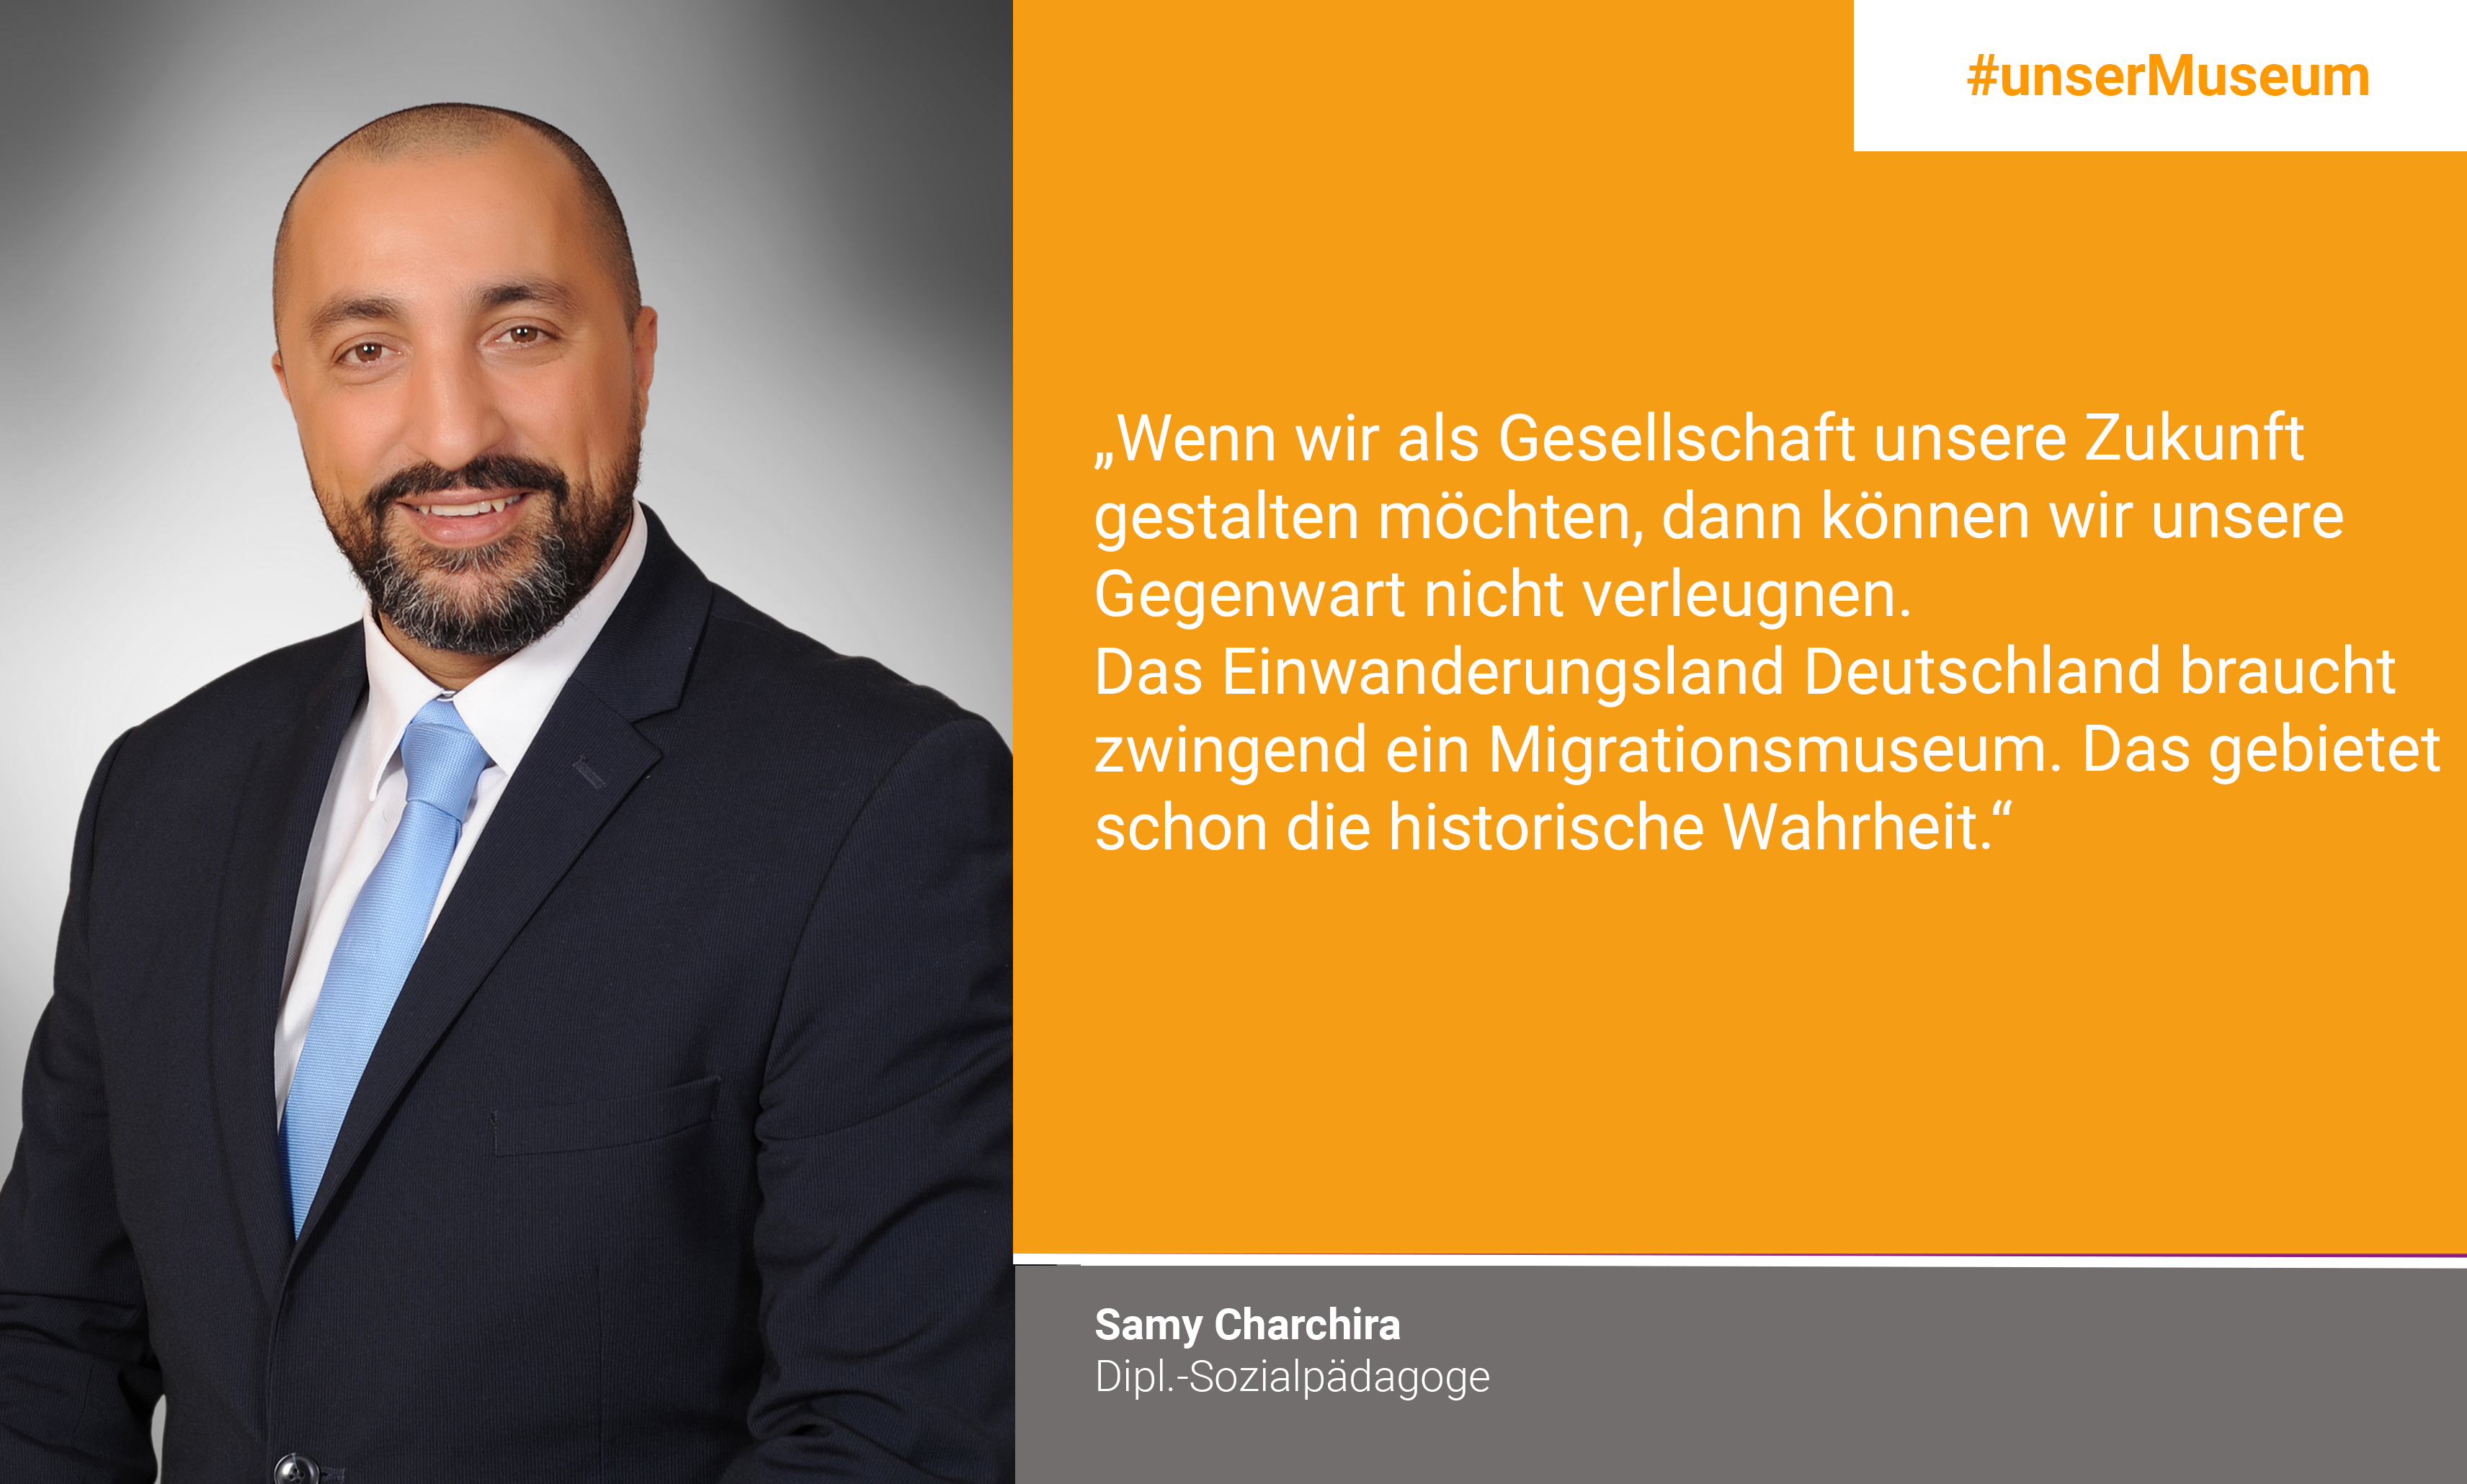 Samy Charchira, diploma social worker: "If we want to shape our future as a society, we cannot deny our present. The country of immigration Germany urgently needs a migration museum. That commands already the historical truth."